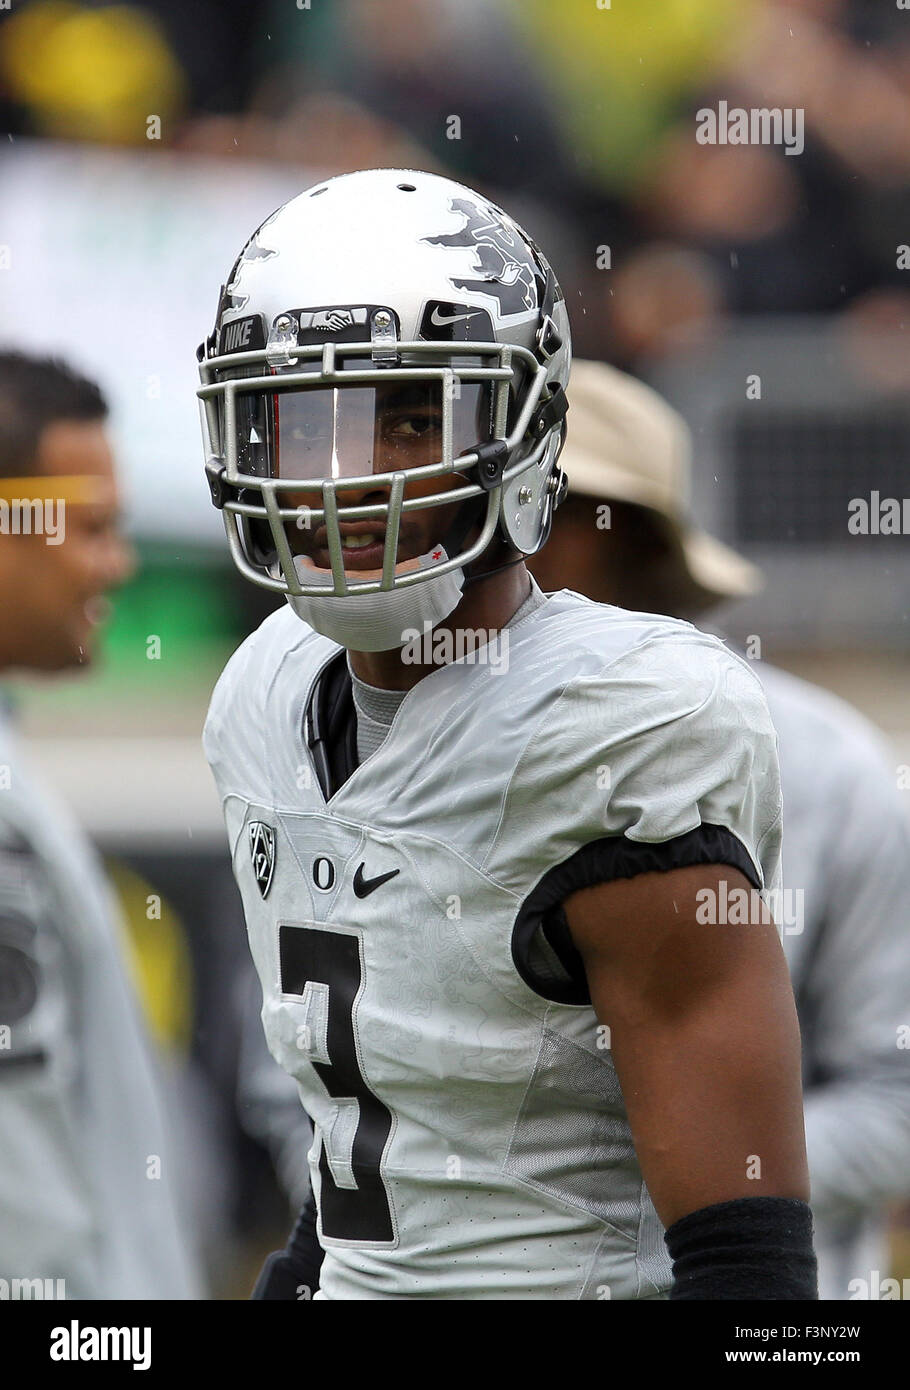 Autzen Stadium, Eugene, OR, USA. 10th Oct, 2015. Oregon Ducks safety Tyree Robinson prior to the start of the NCAA football game between the Ducks and the Washington State Cougars at Autzen Stadium, Eugene, OR. Larry C. Lawson/CSM/Alamy Live News Stock Photo